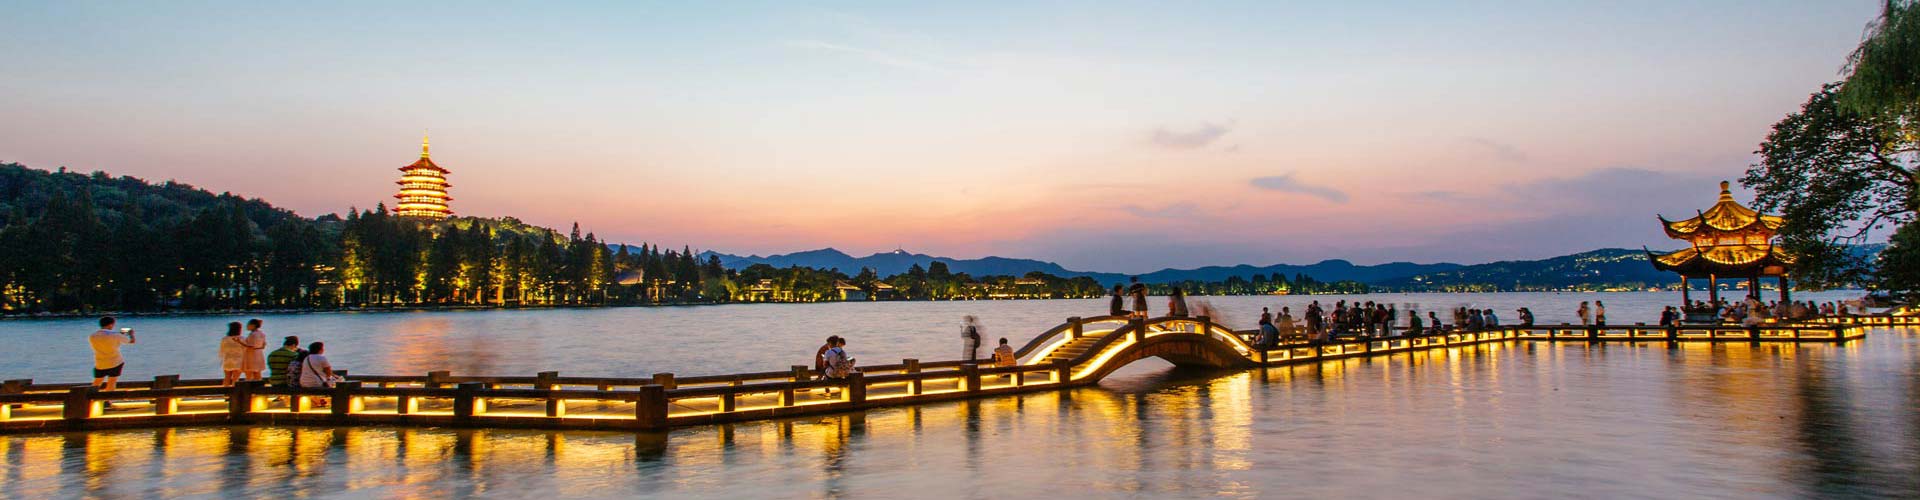 1 Day Hangzhou Tour from Shanghai by High-speed Train